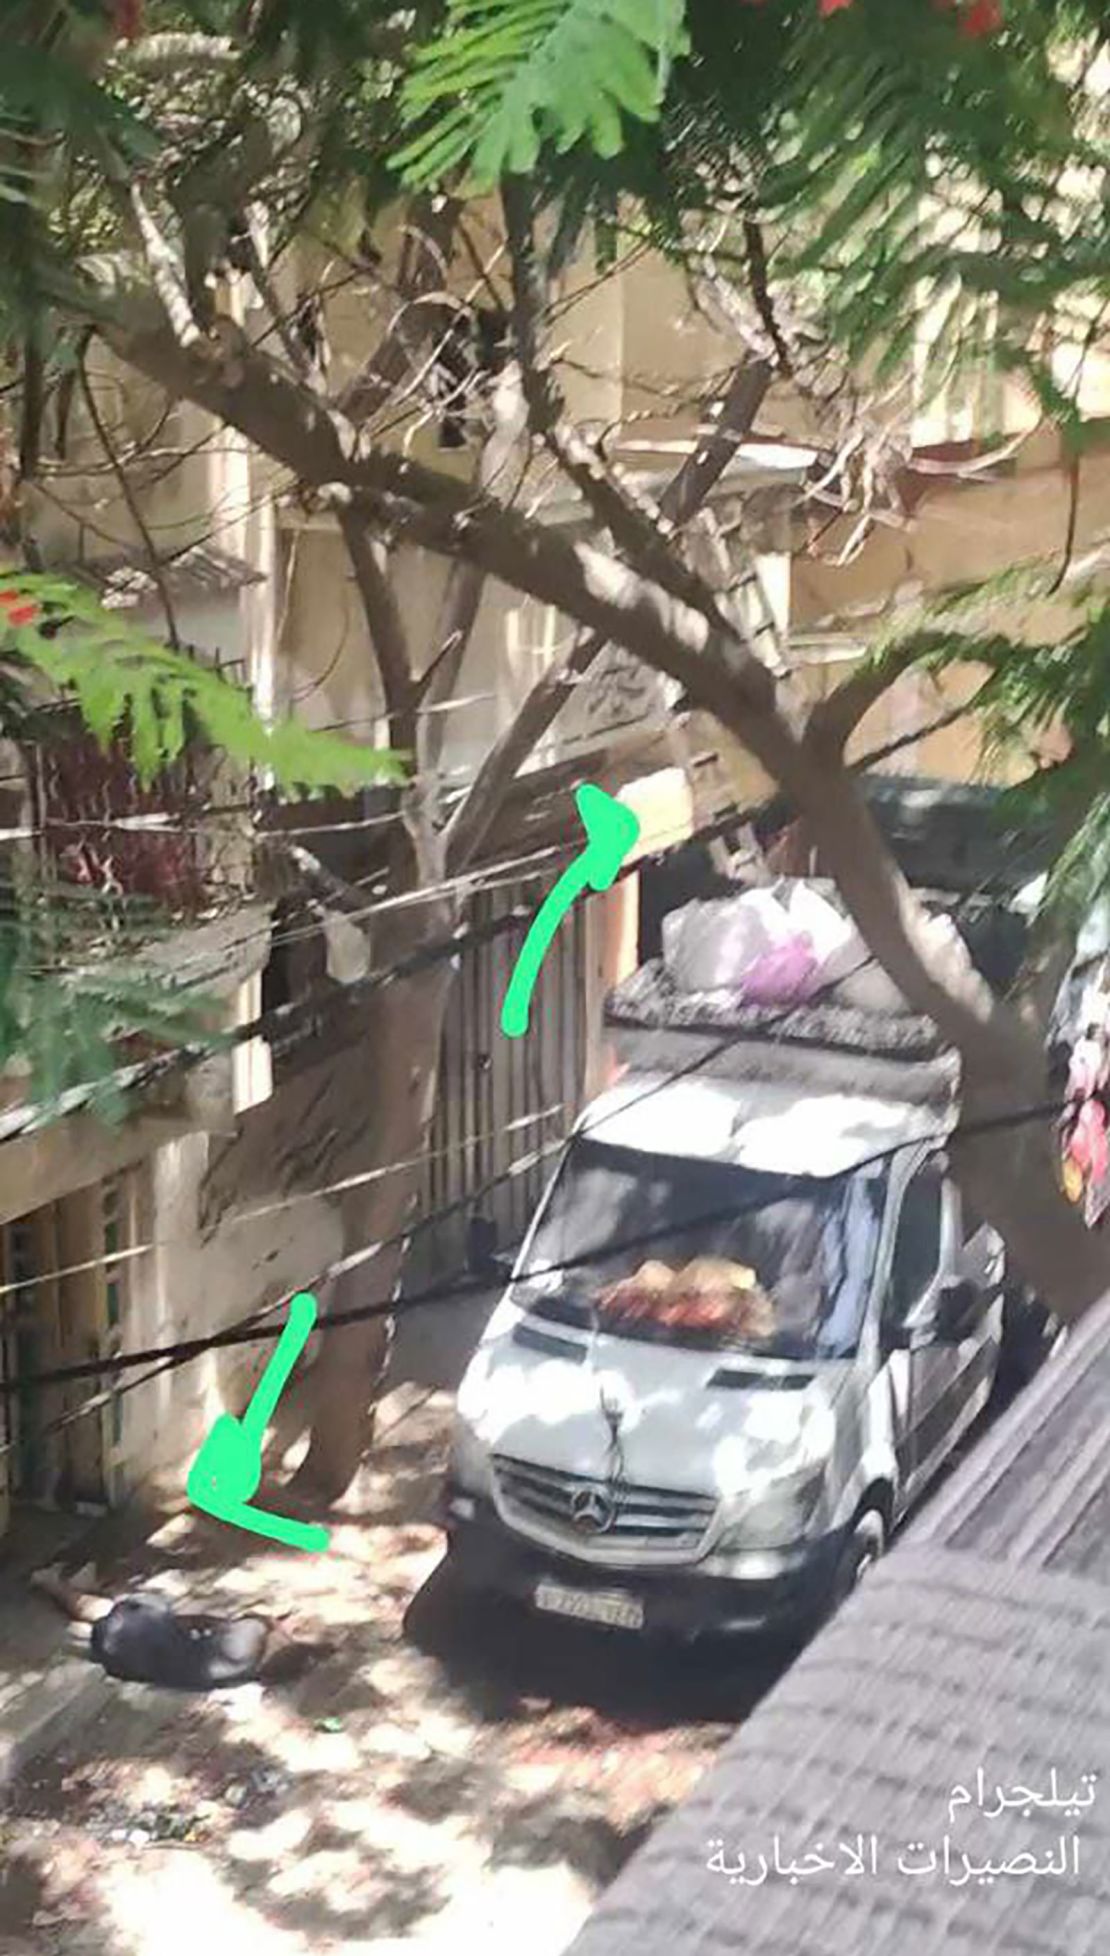 This Mercedes van, seen in an image taken from social media, was parked on a street in Nuseirat, Gaza, where the operation unfolded. Two ladders can be seen leaning up against a multistory building next to the van to reach an upper floor.